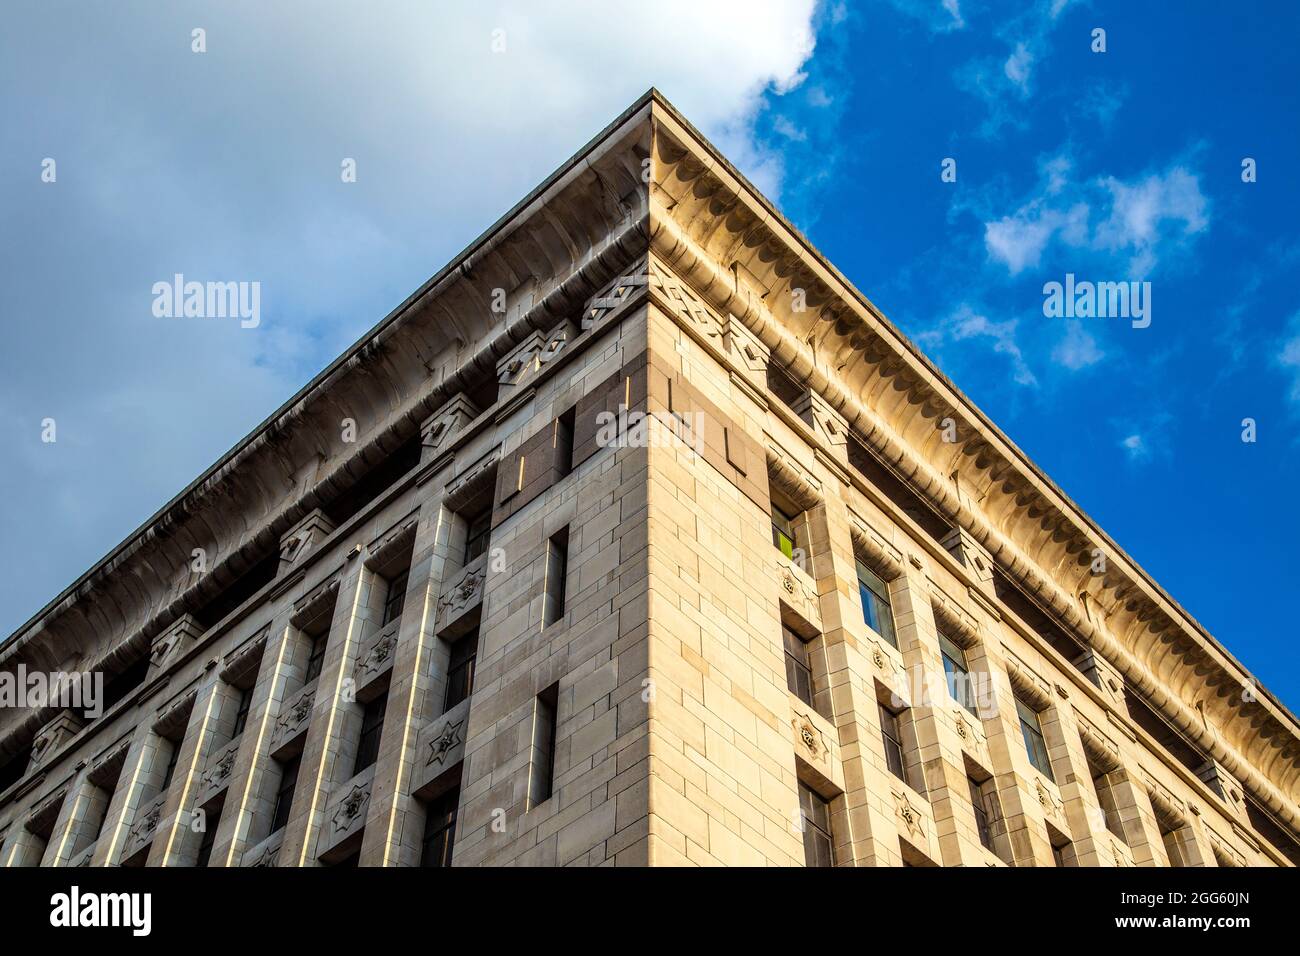 Grade II listed office building Adelaide House Grade II by London Bridge in Art Deco style with Egyptian influence, London, UK Stock Photo